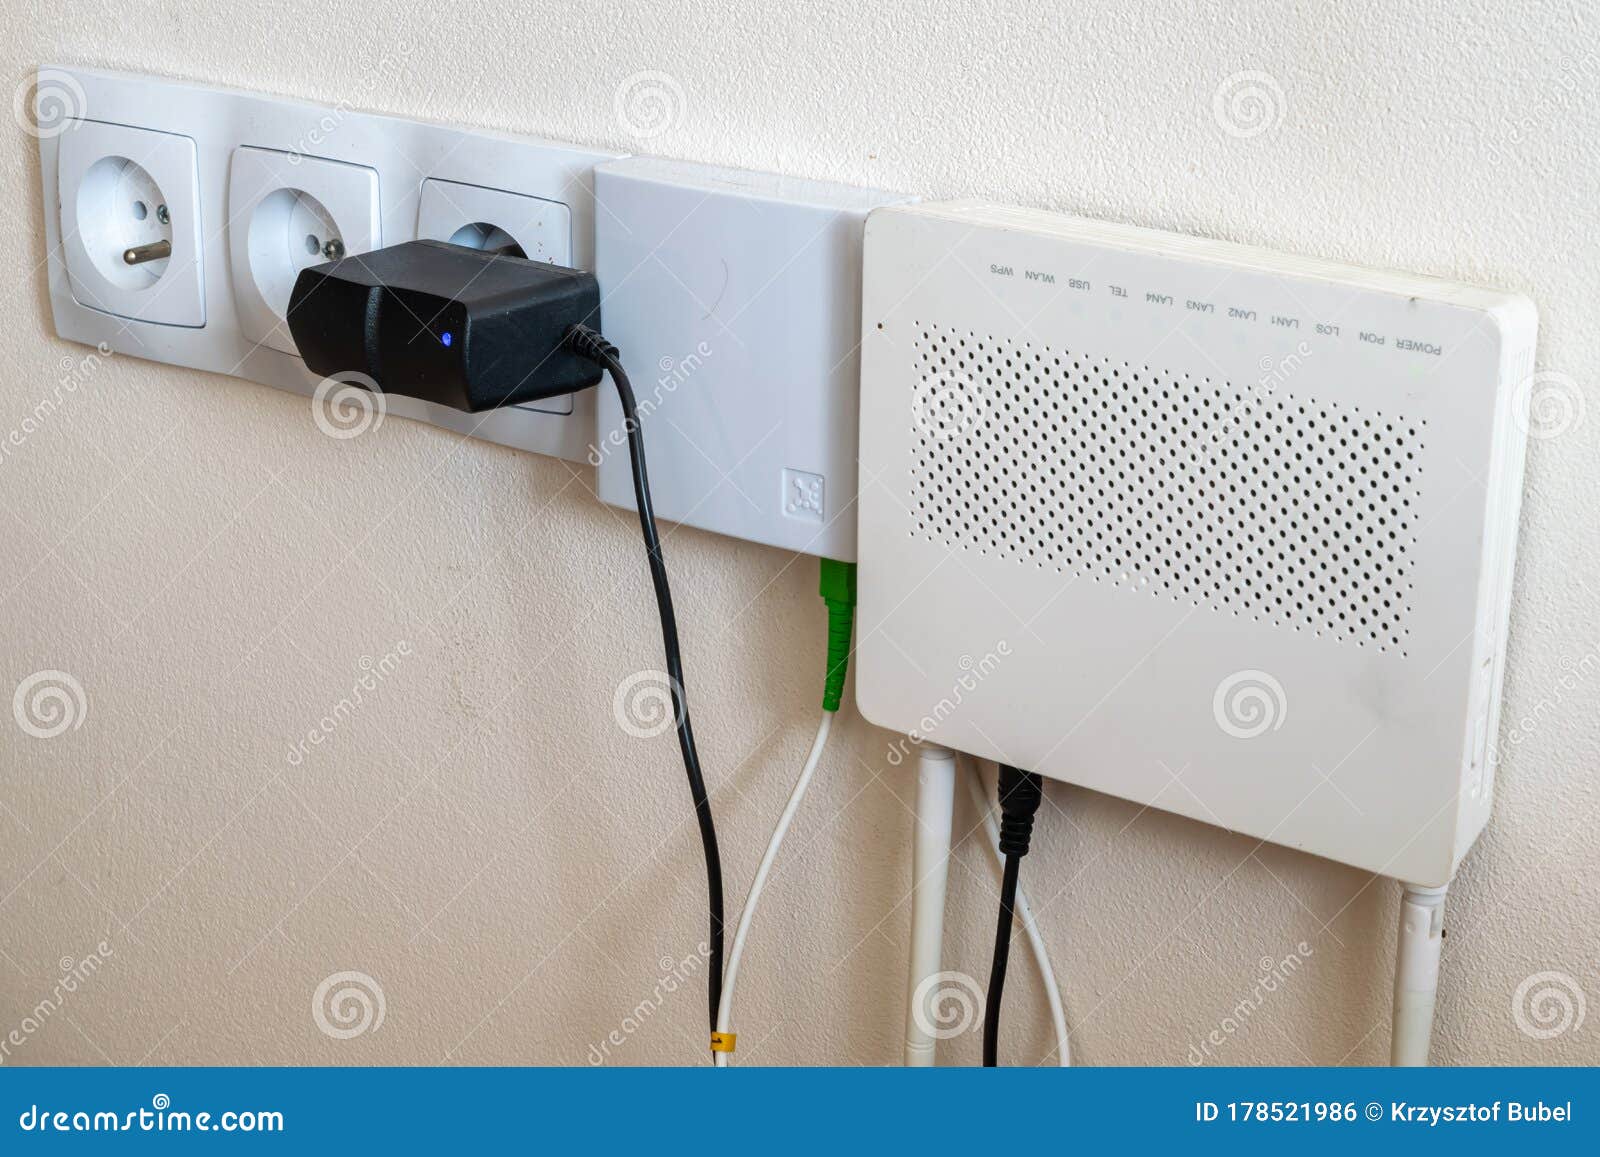 electrical outlets and internet modem on a cream wall background